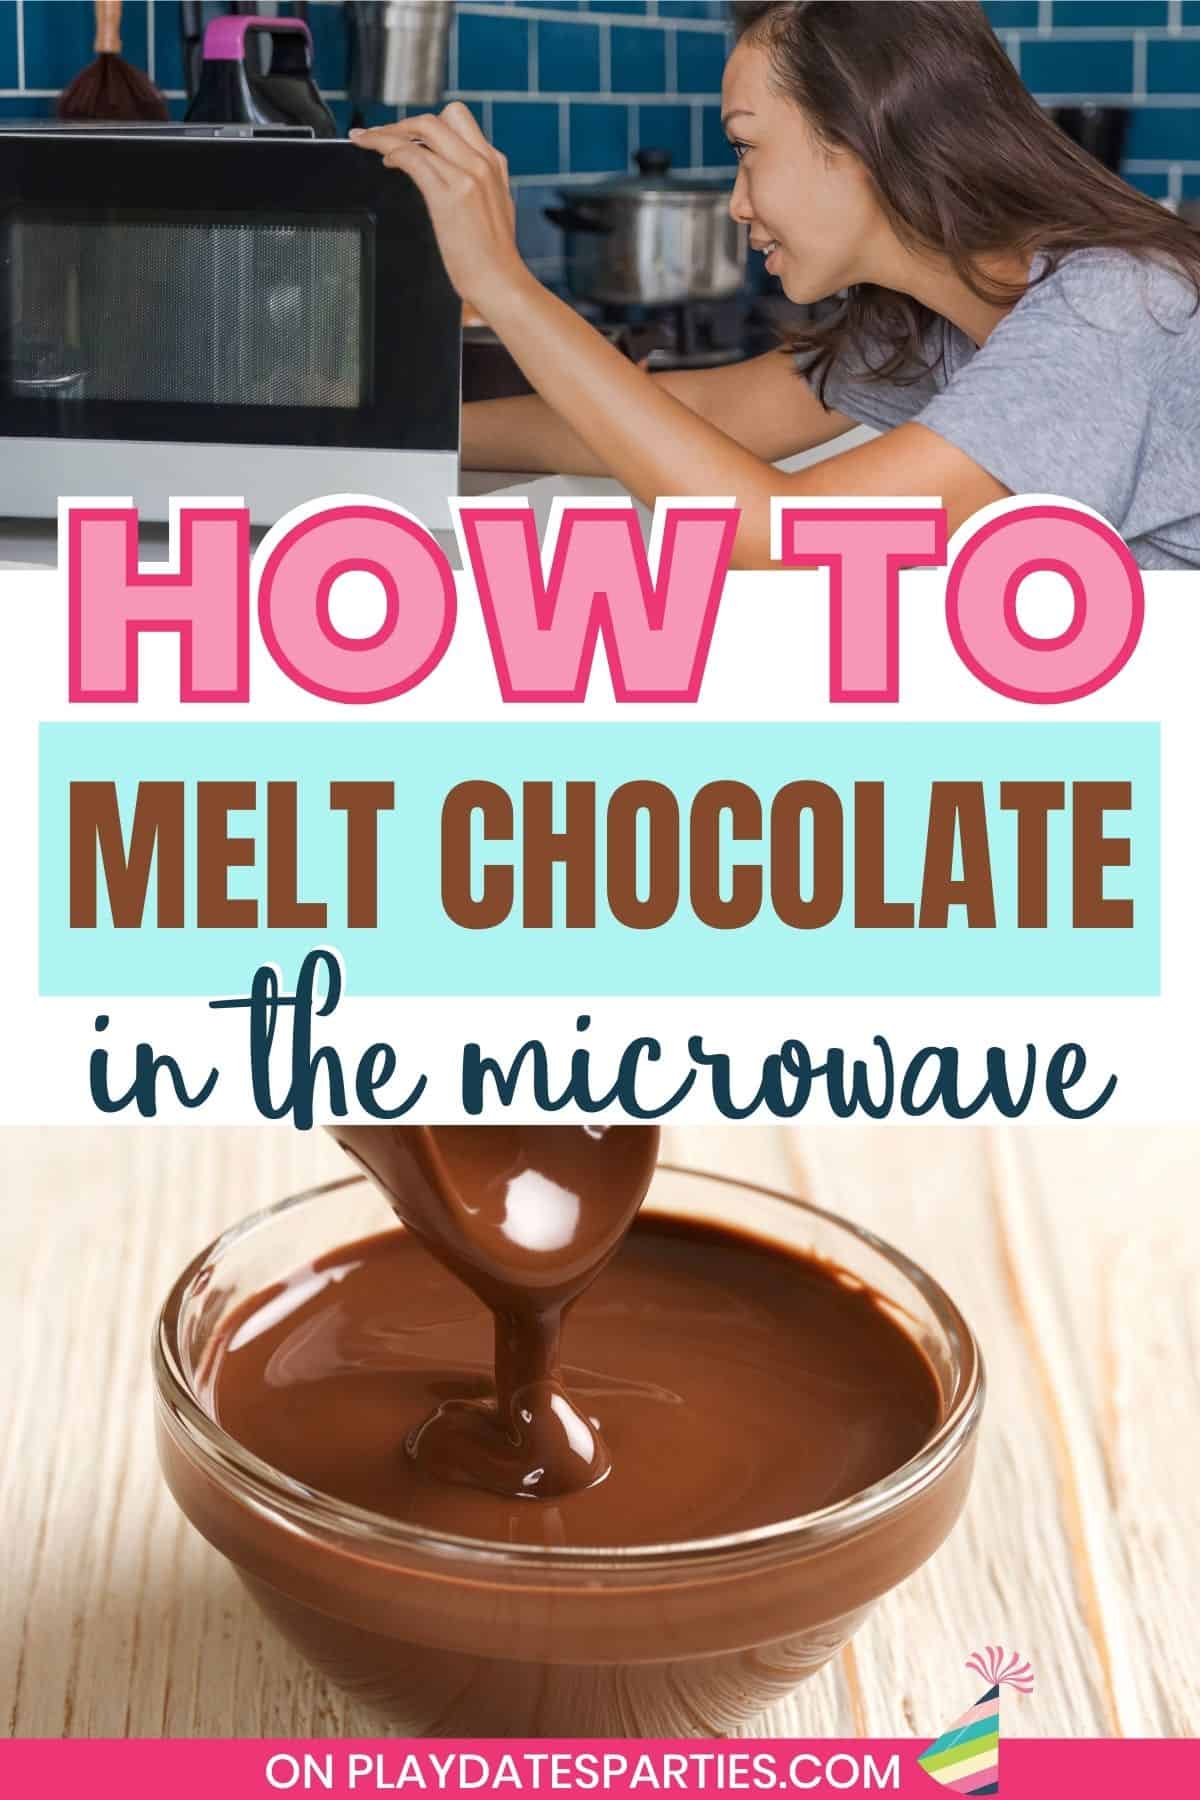 How to melt chocolate in the microwave.